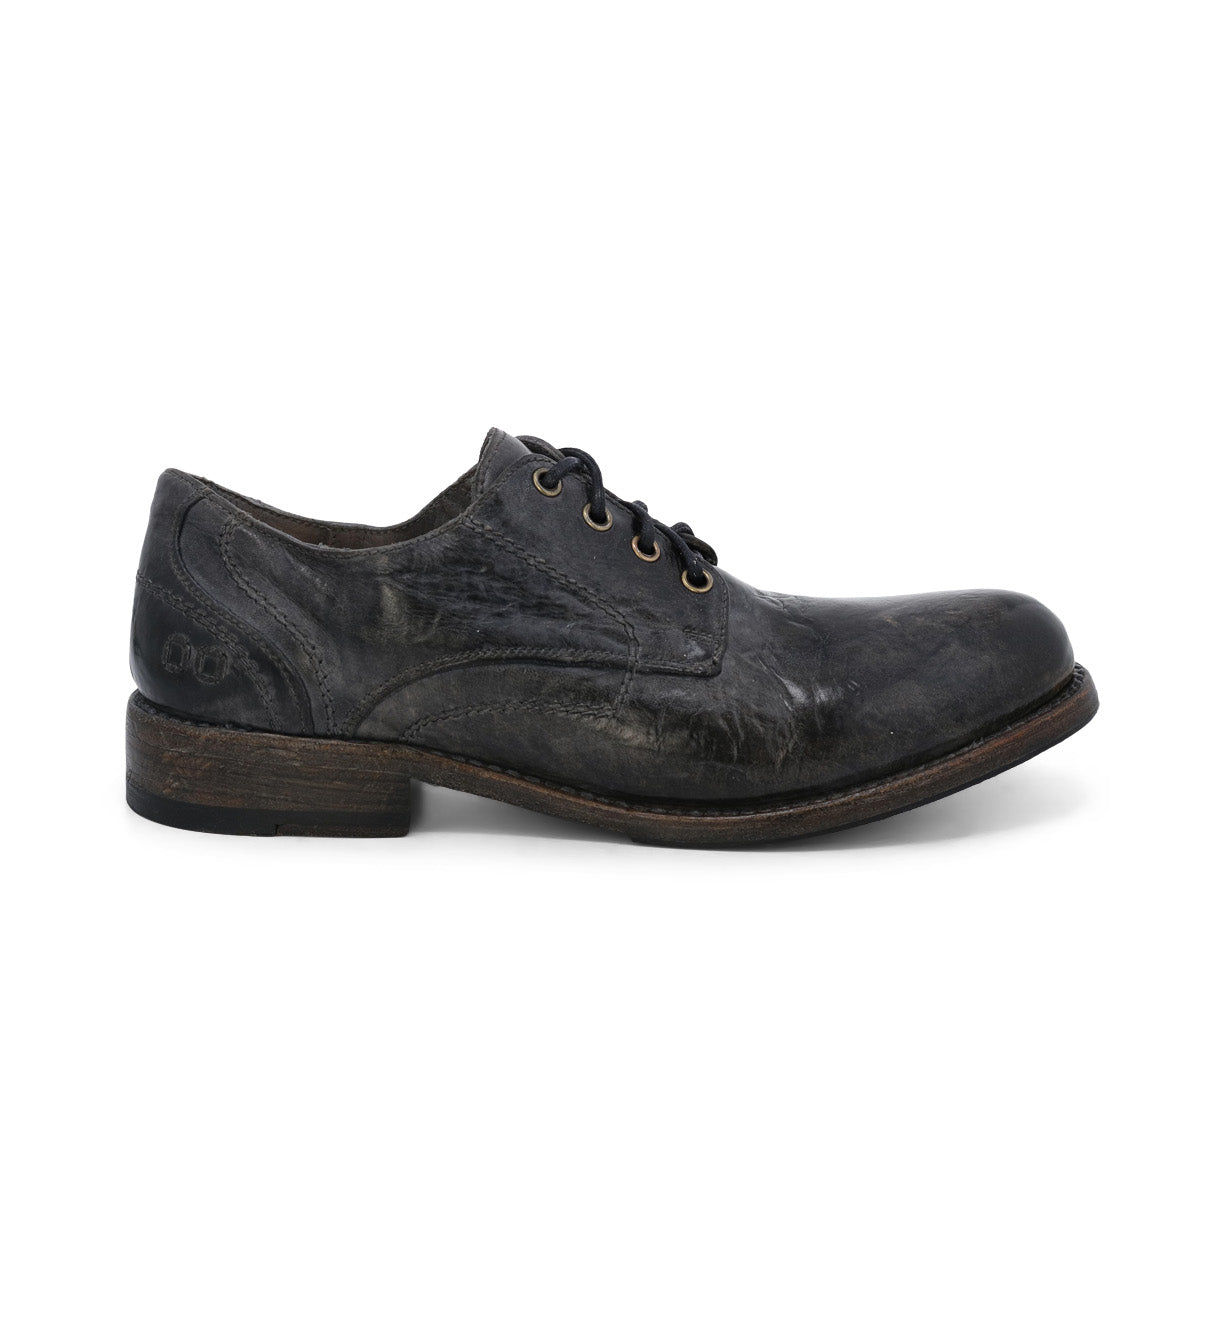 A pair of Bed Stu Galao men's lace up shoes with a leather sole.